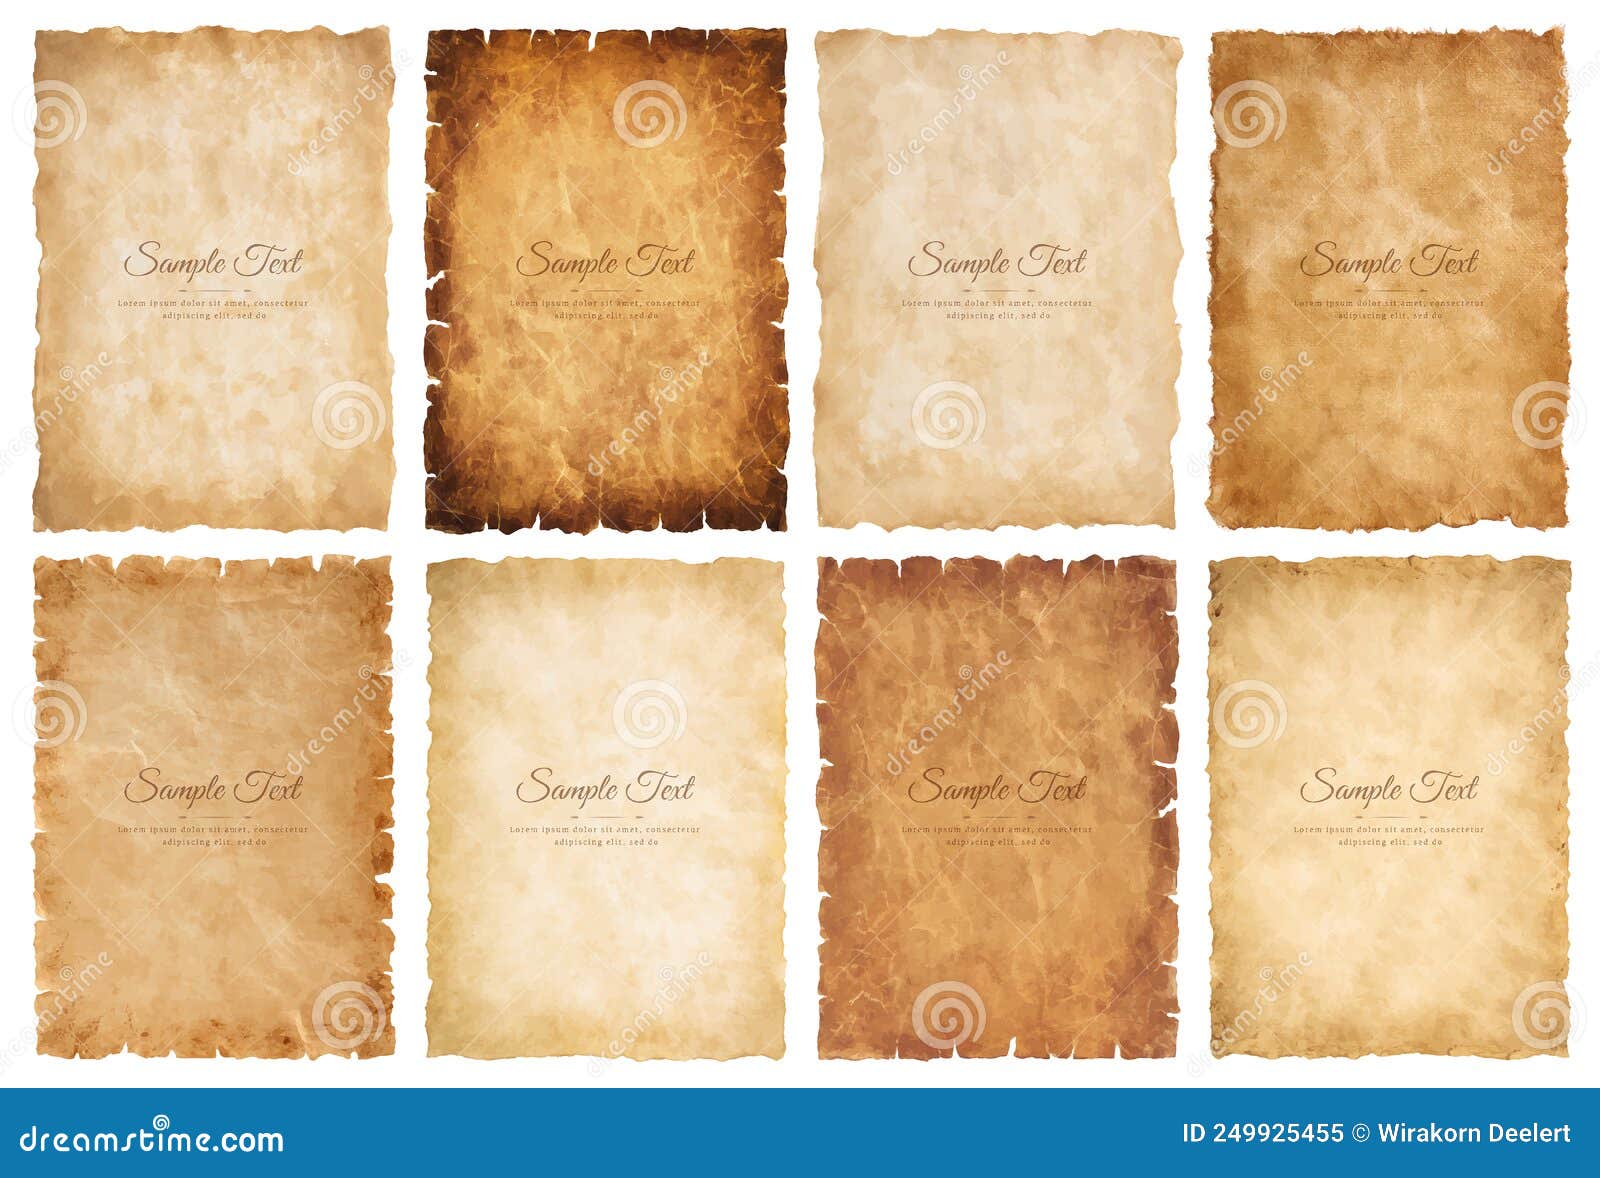 https://thumbs.dreamstime.com/z/vector-collection-set-old-parchment-paper-sheet-vintage-aged-texture-isolated-white-background-249925455.jpg